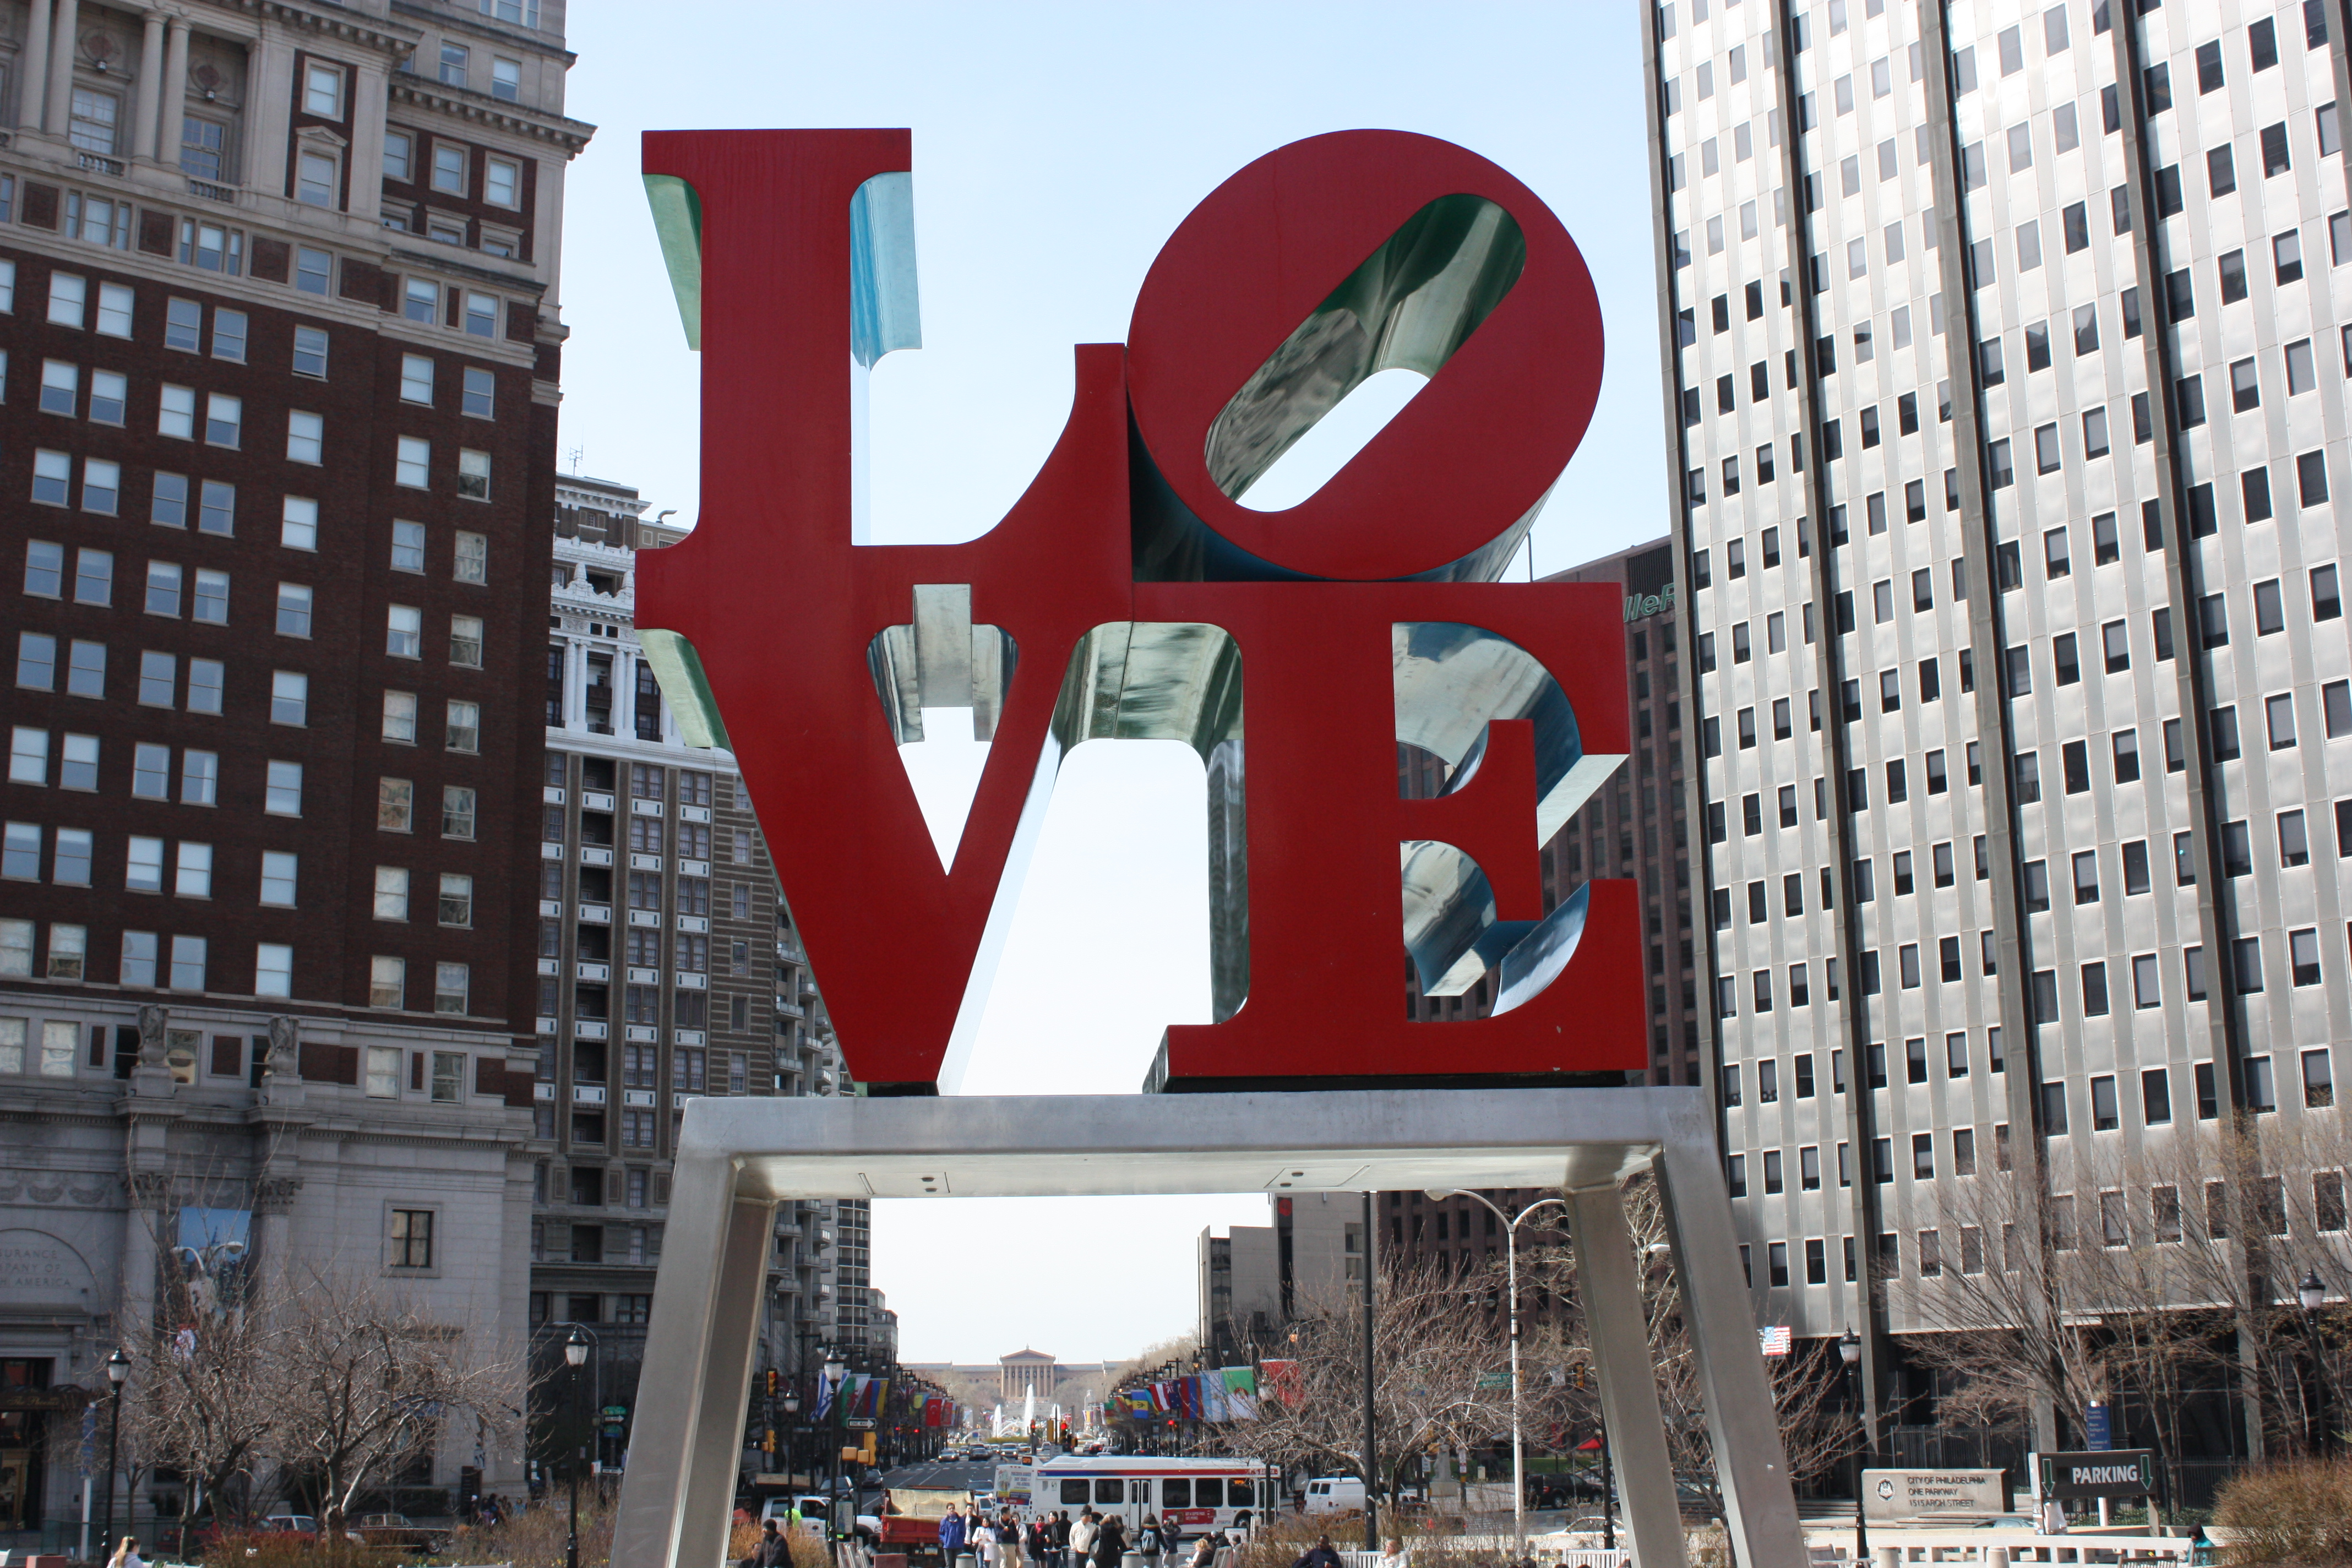 Philly Love Park